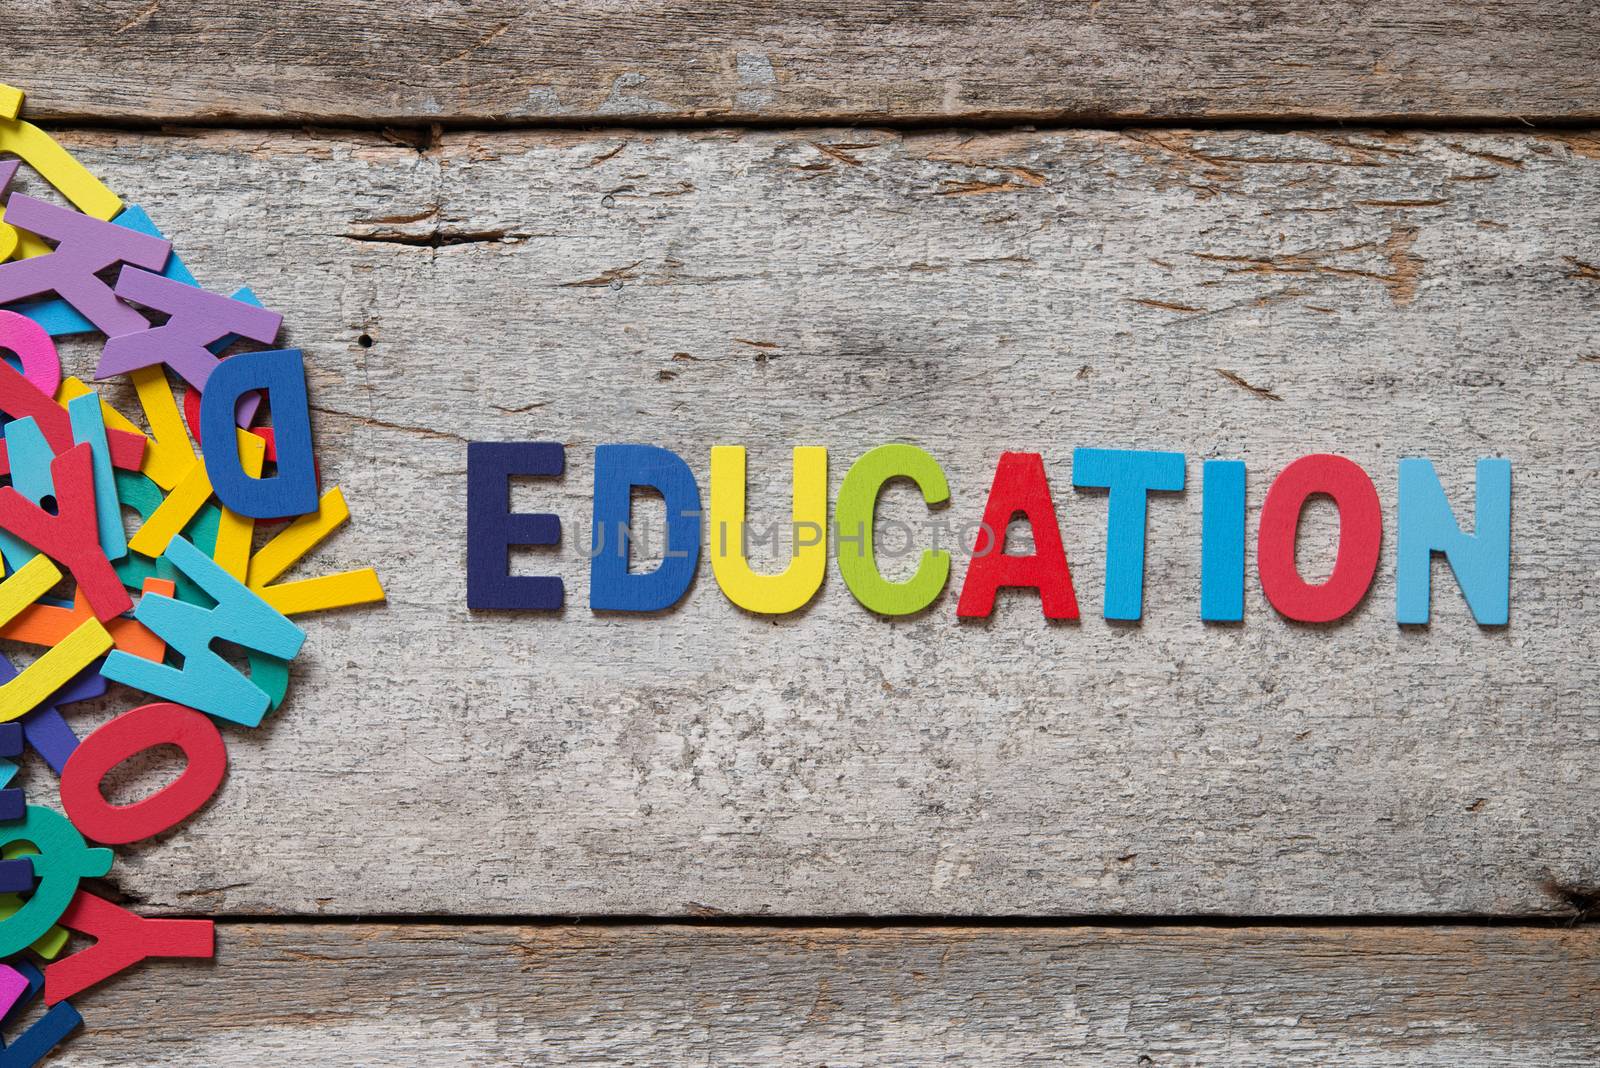 The colorful words "EDUCATION" made with wooden letters next to a pile of other letters over old wooden board.